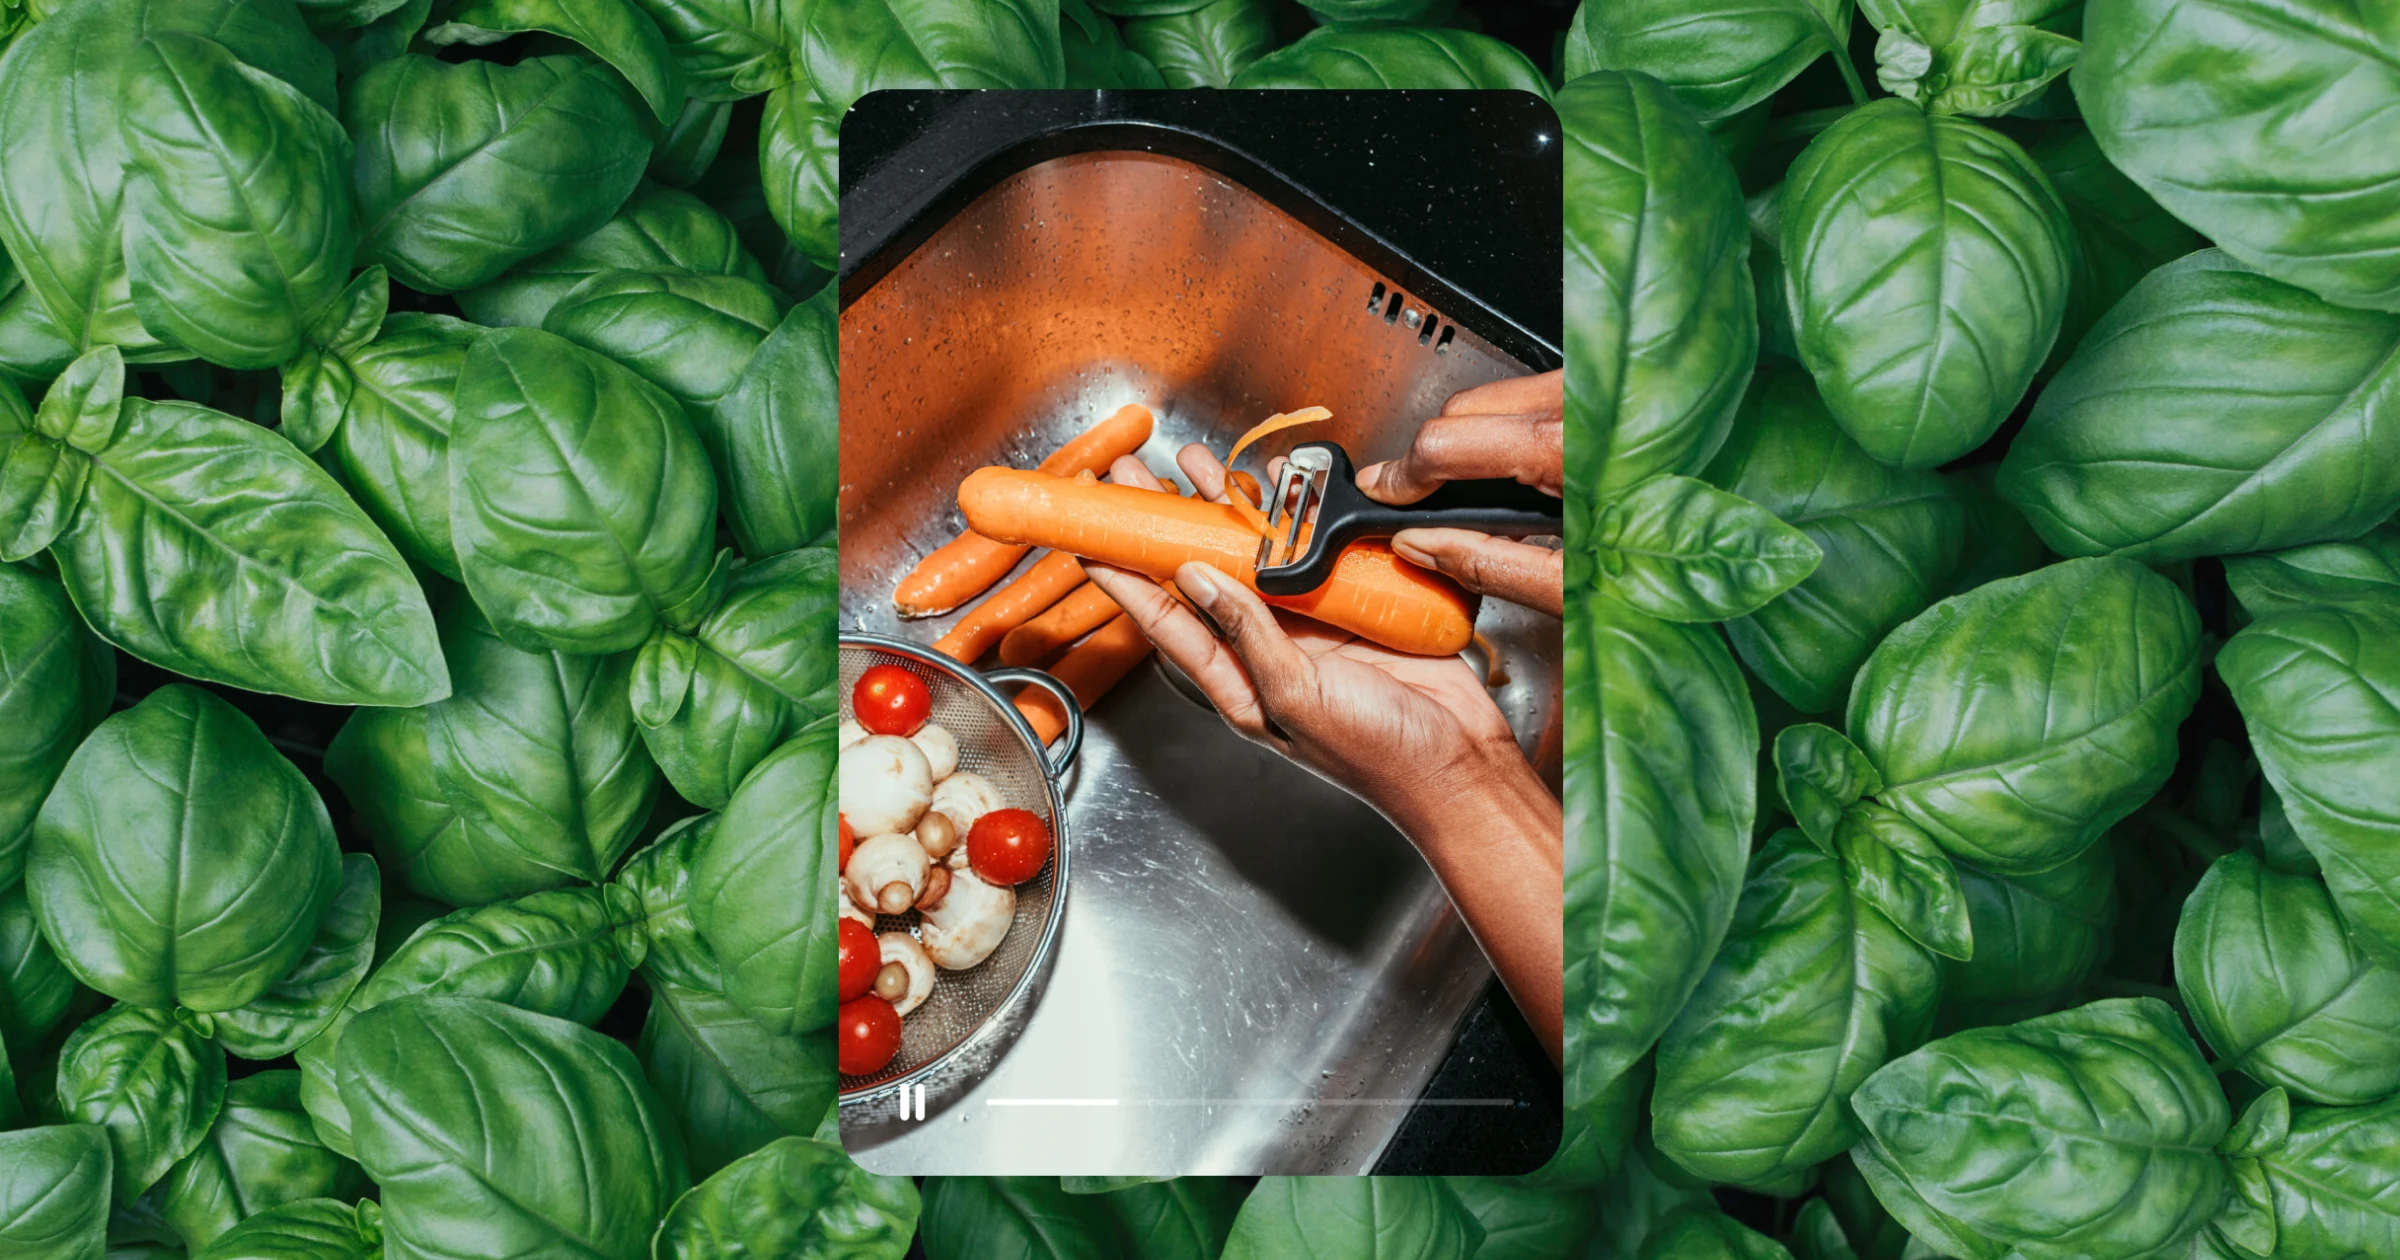 Idea Pin of black hands shaving carrots over a bowl of tomatoes and mushrooms, centered on a background image of a basil plant.